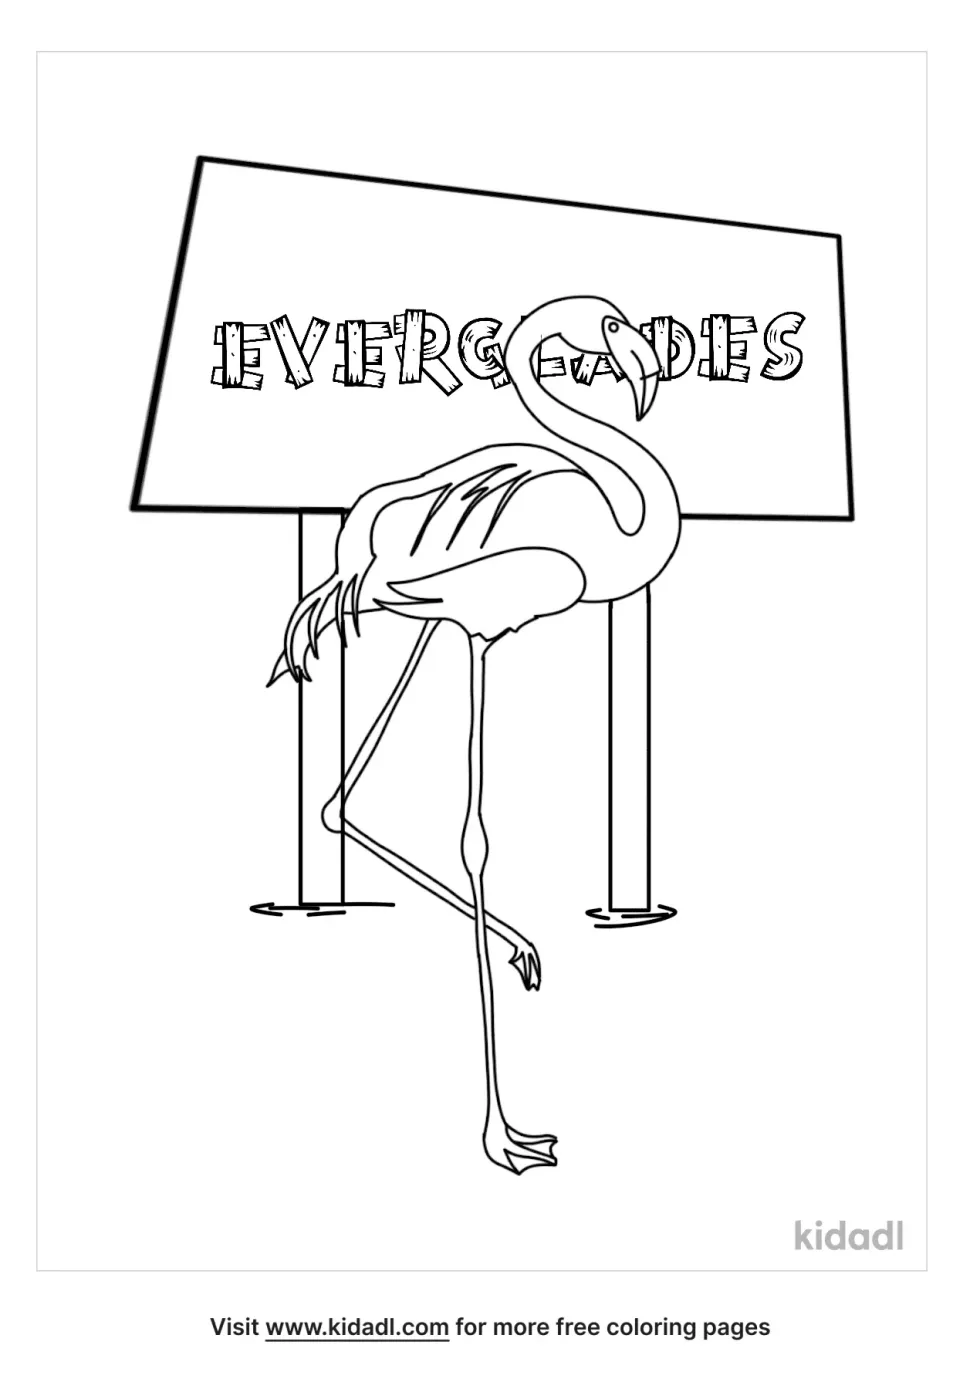 Everglades Coloring Page